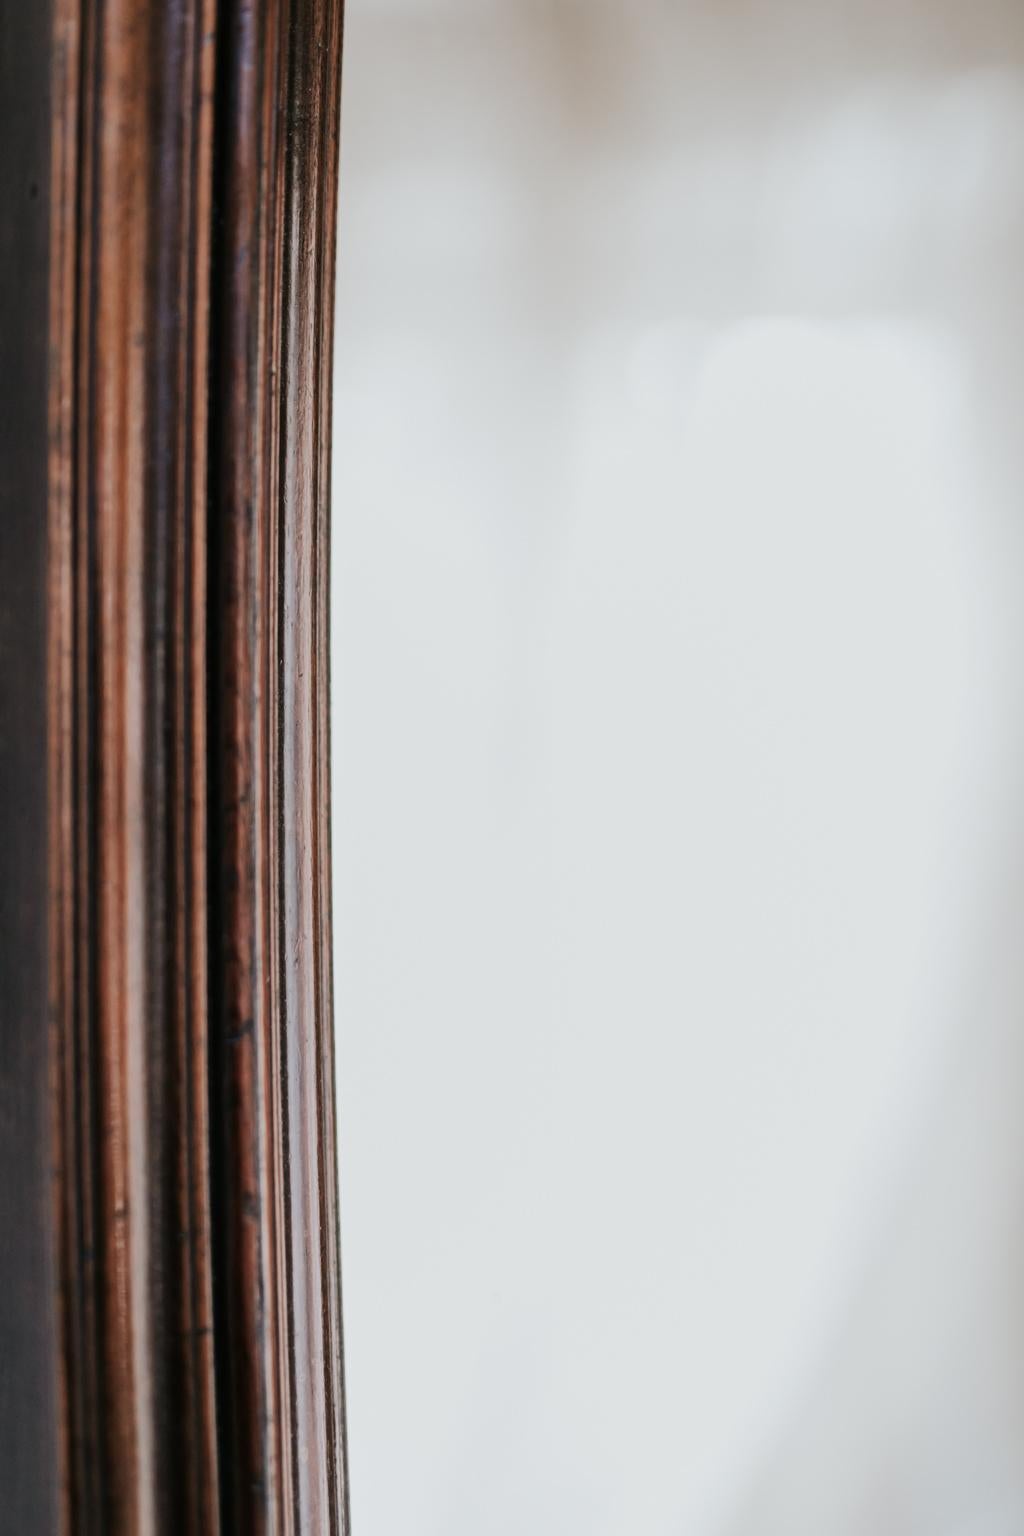 An unusual and very chic distortion mirror, with beautiful walnut wooden frame.